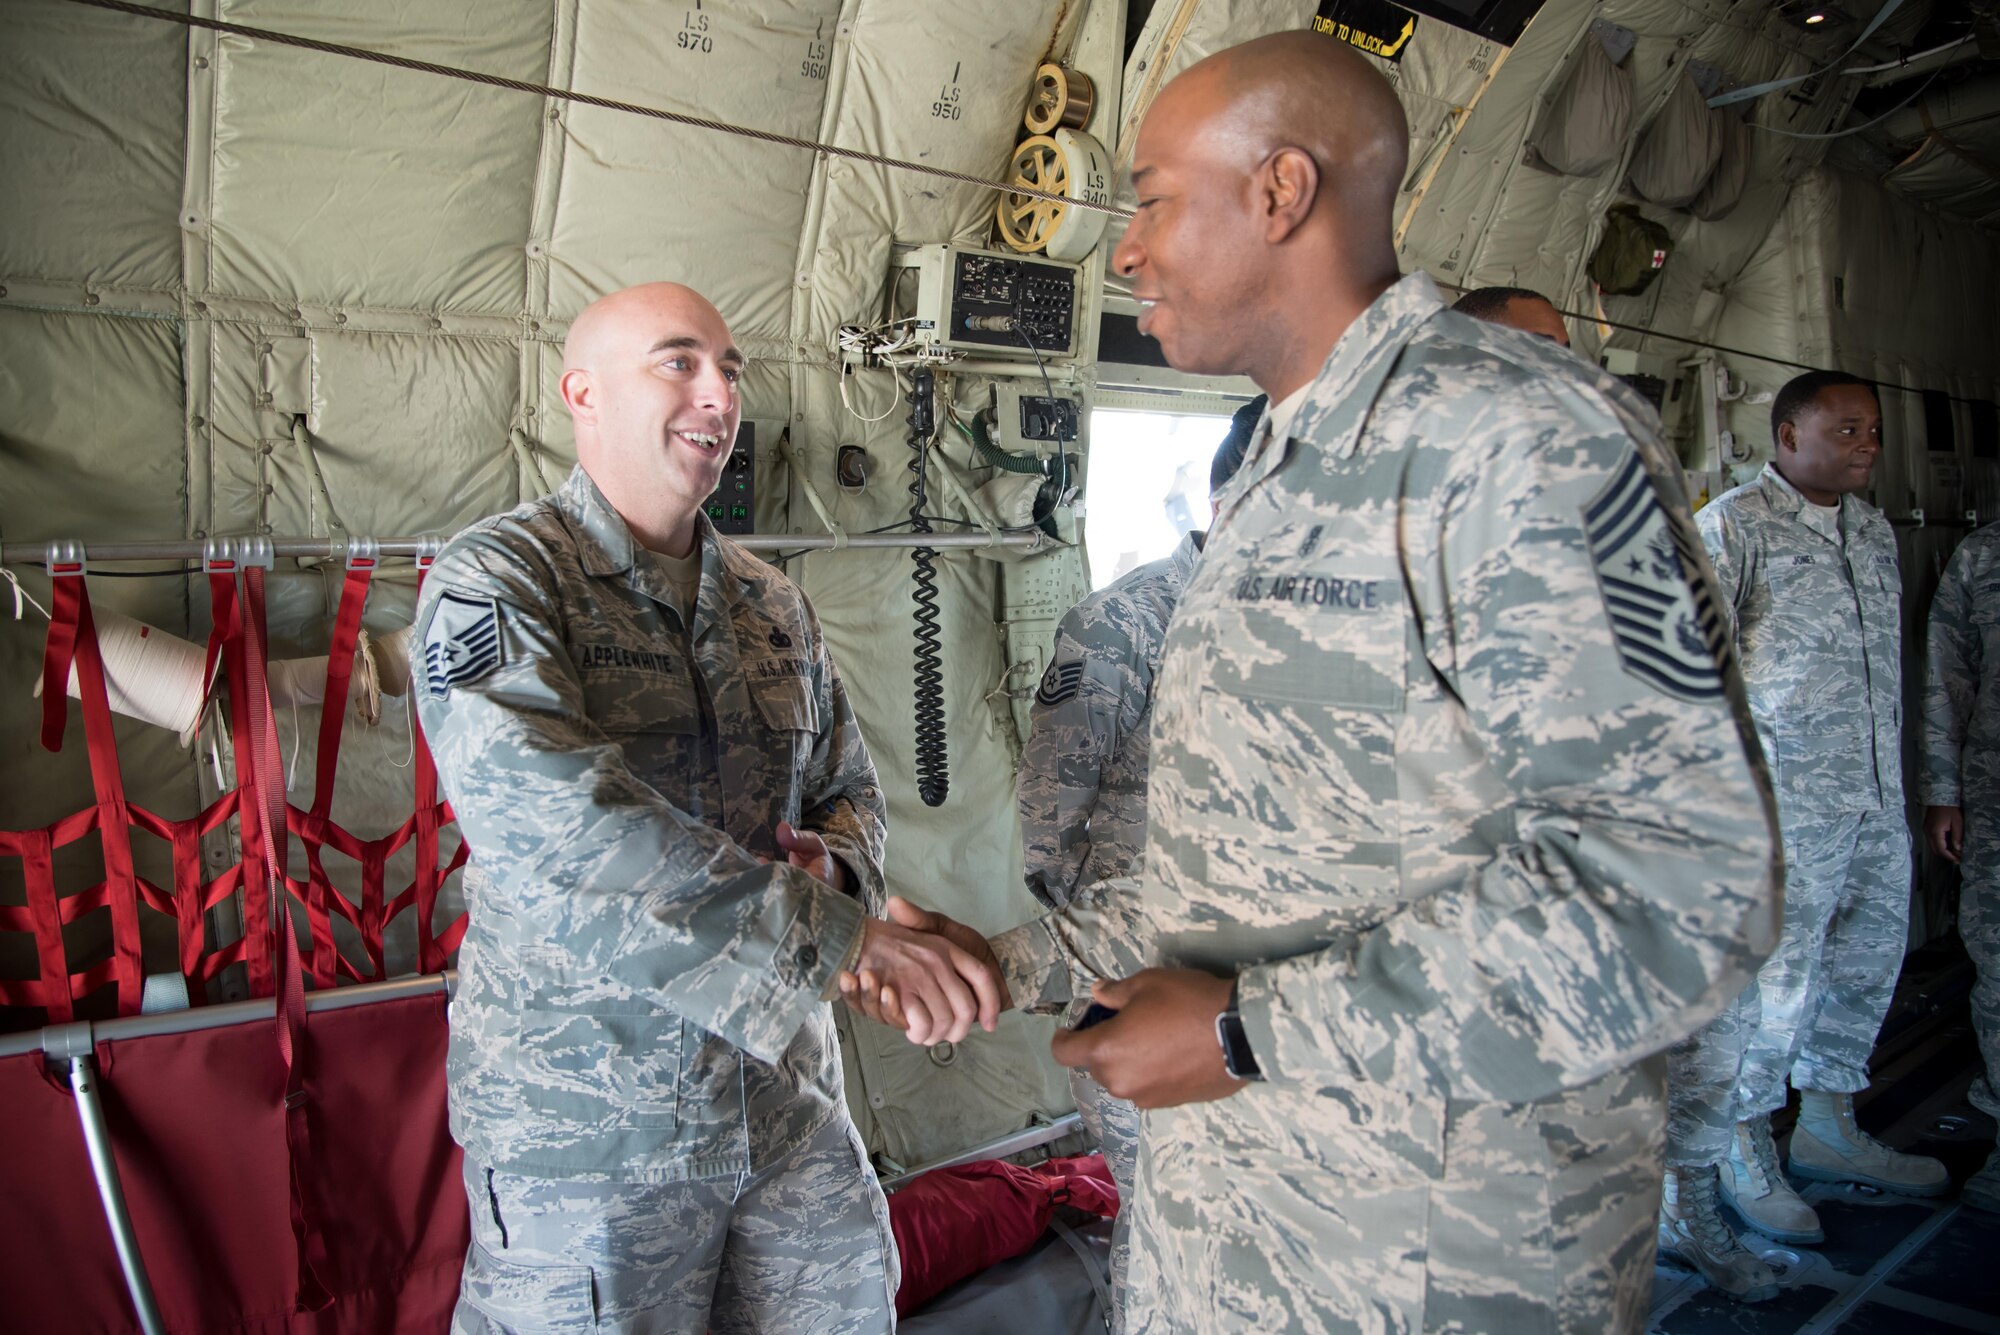 Chief Master Sergeant of the Air Force Kaleth O. Wright presents a coin to Master Sgt. Lucas Applewhite, 403rd Security Forces Squadron during his visit to the 403rd Wing Oct. 25, 2017 at Keelser Air Force Base, Mississippi. (U.S. Air Force photo/Staff Sgt. Heather Heiney)